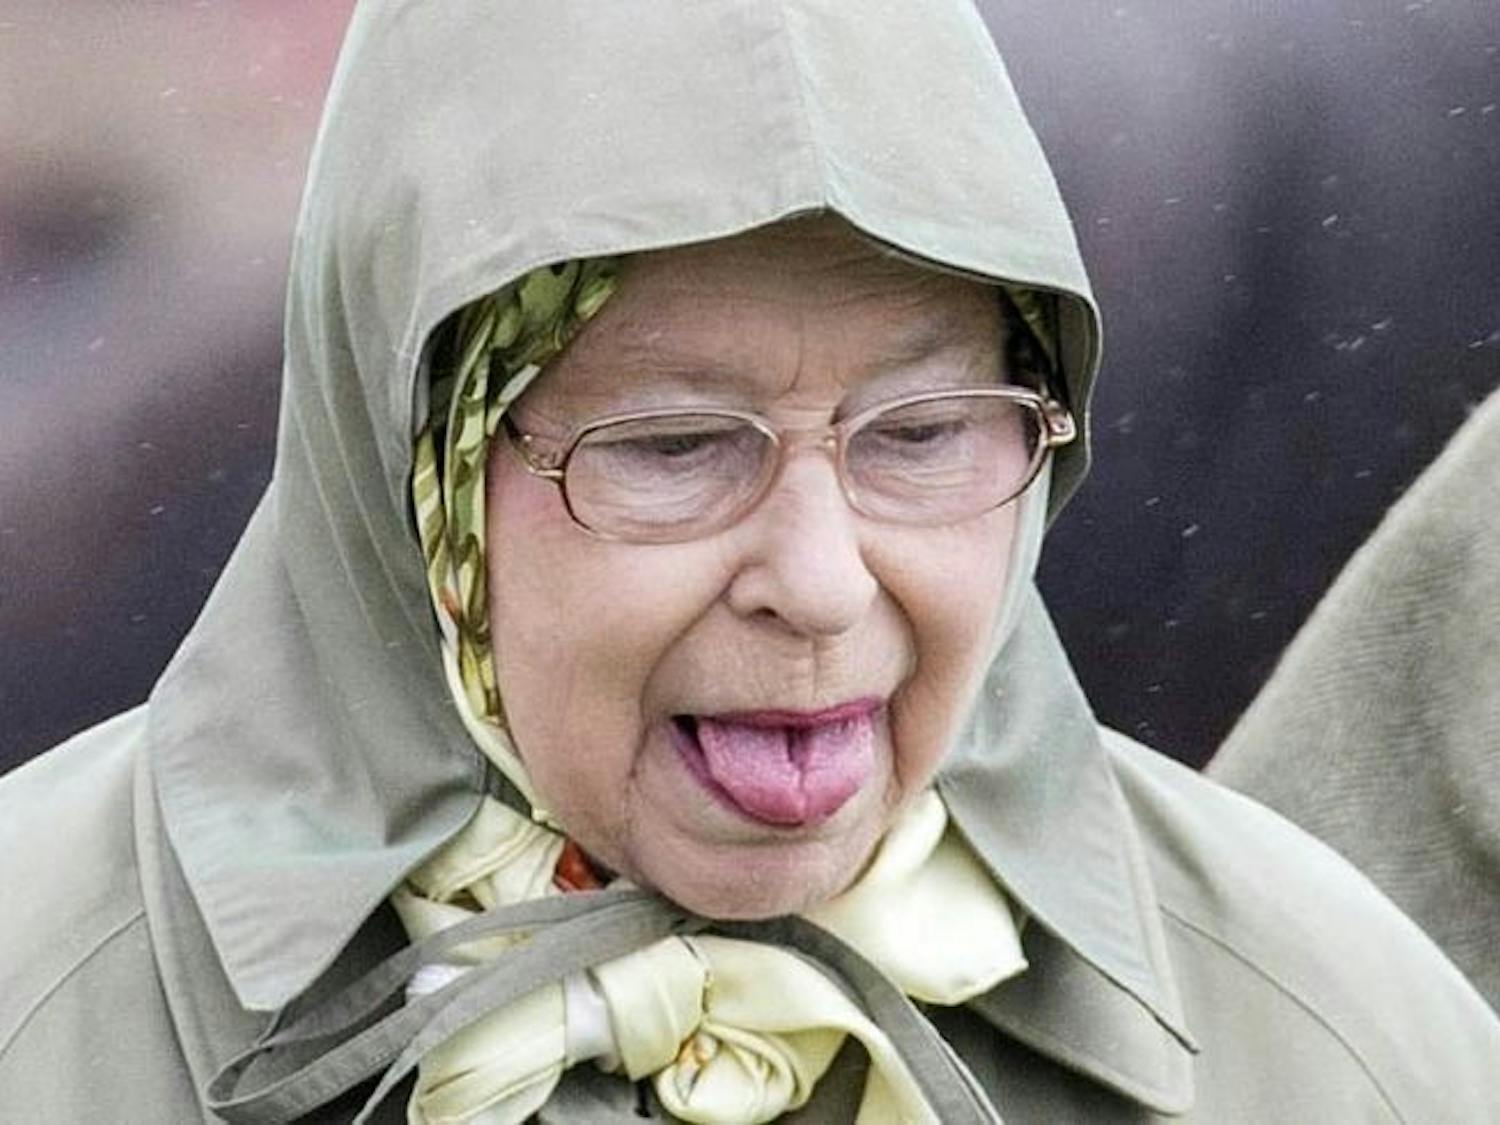 5 of the best meme-worthy moments from Queen Elizabeth II - The Post